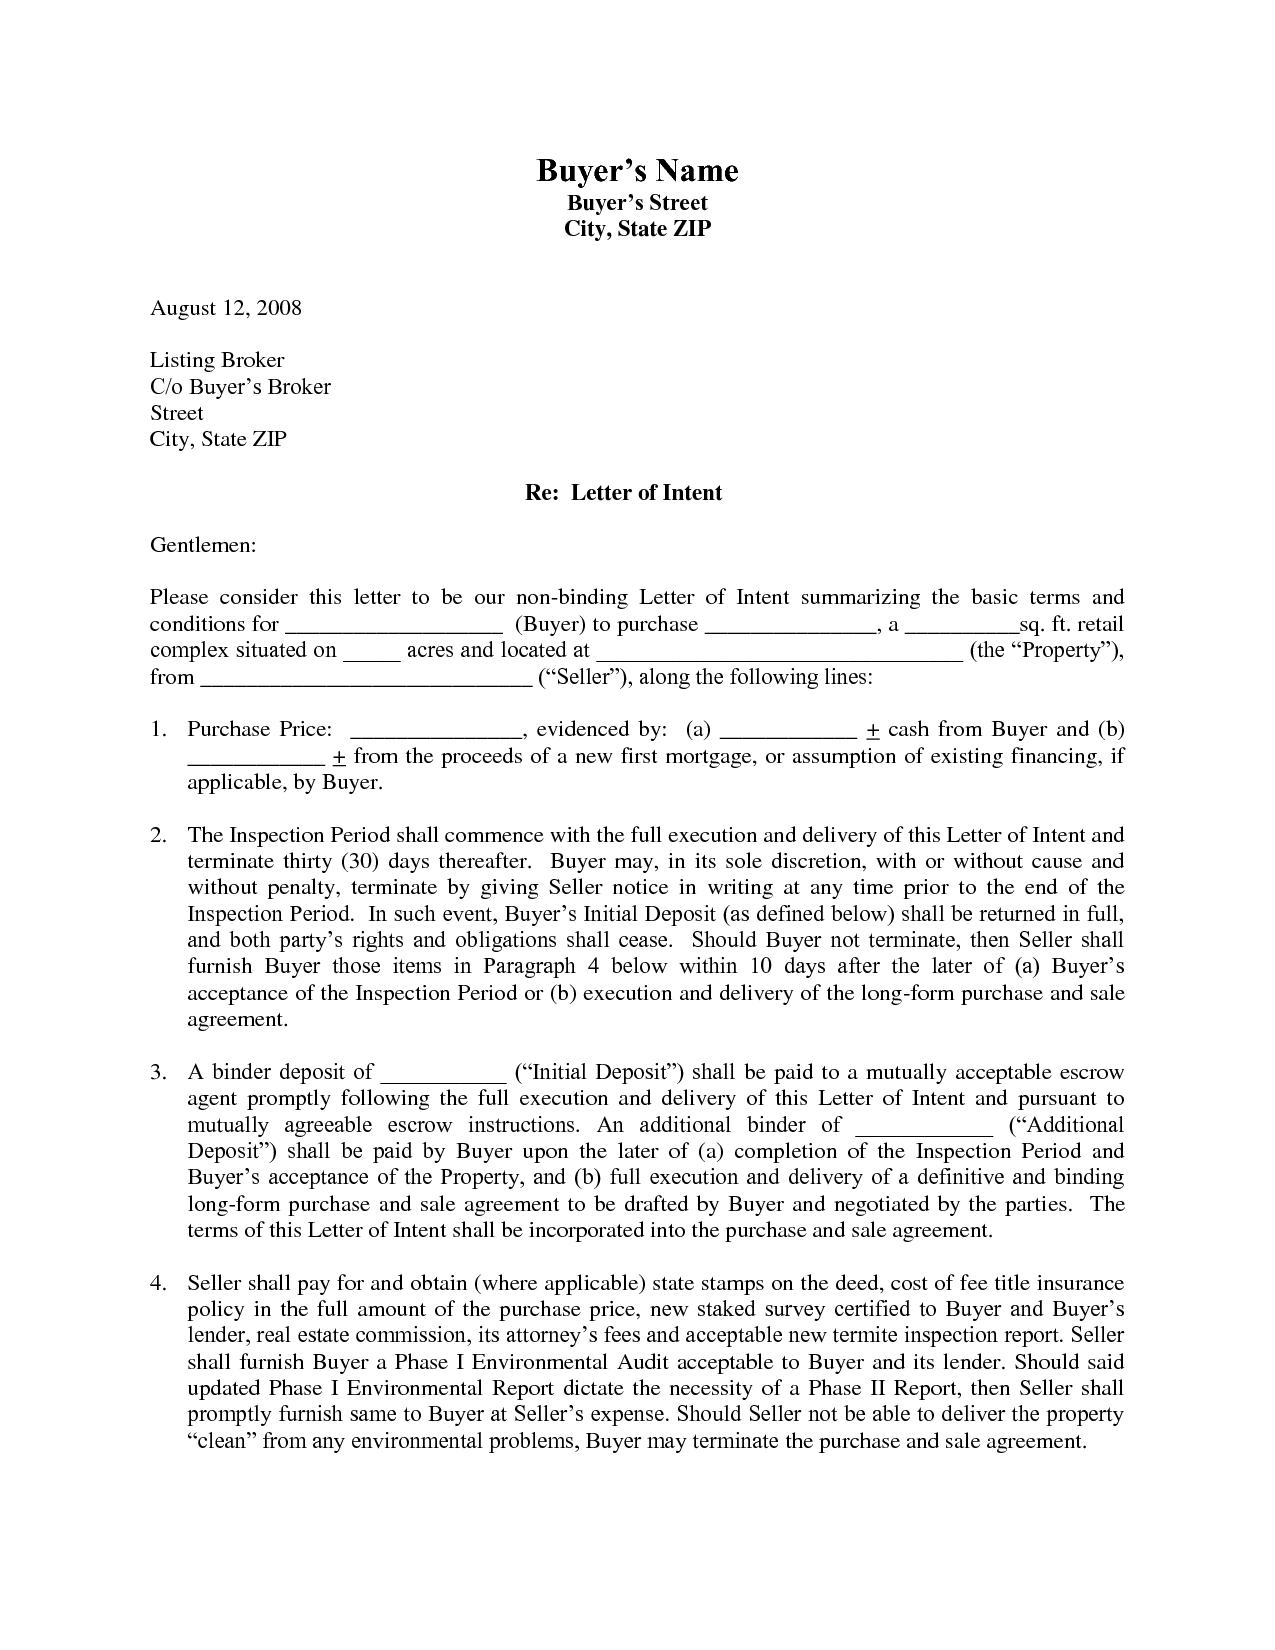 Land Purchase Offer Letter Template - Sample Letter Intent to Purchase Land High Definition Sell